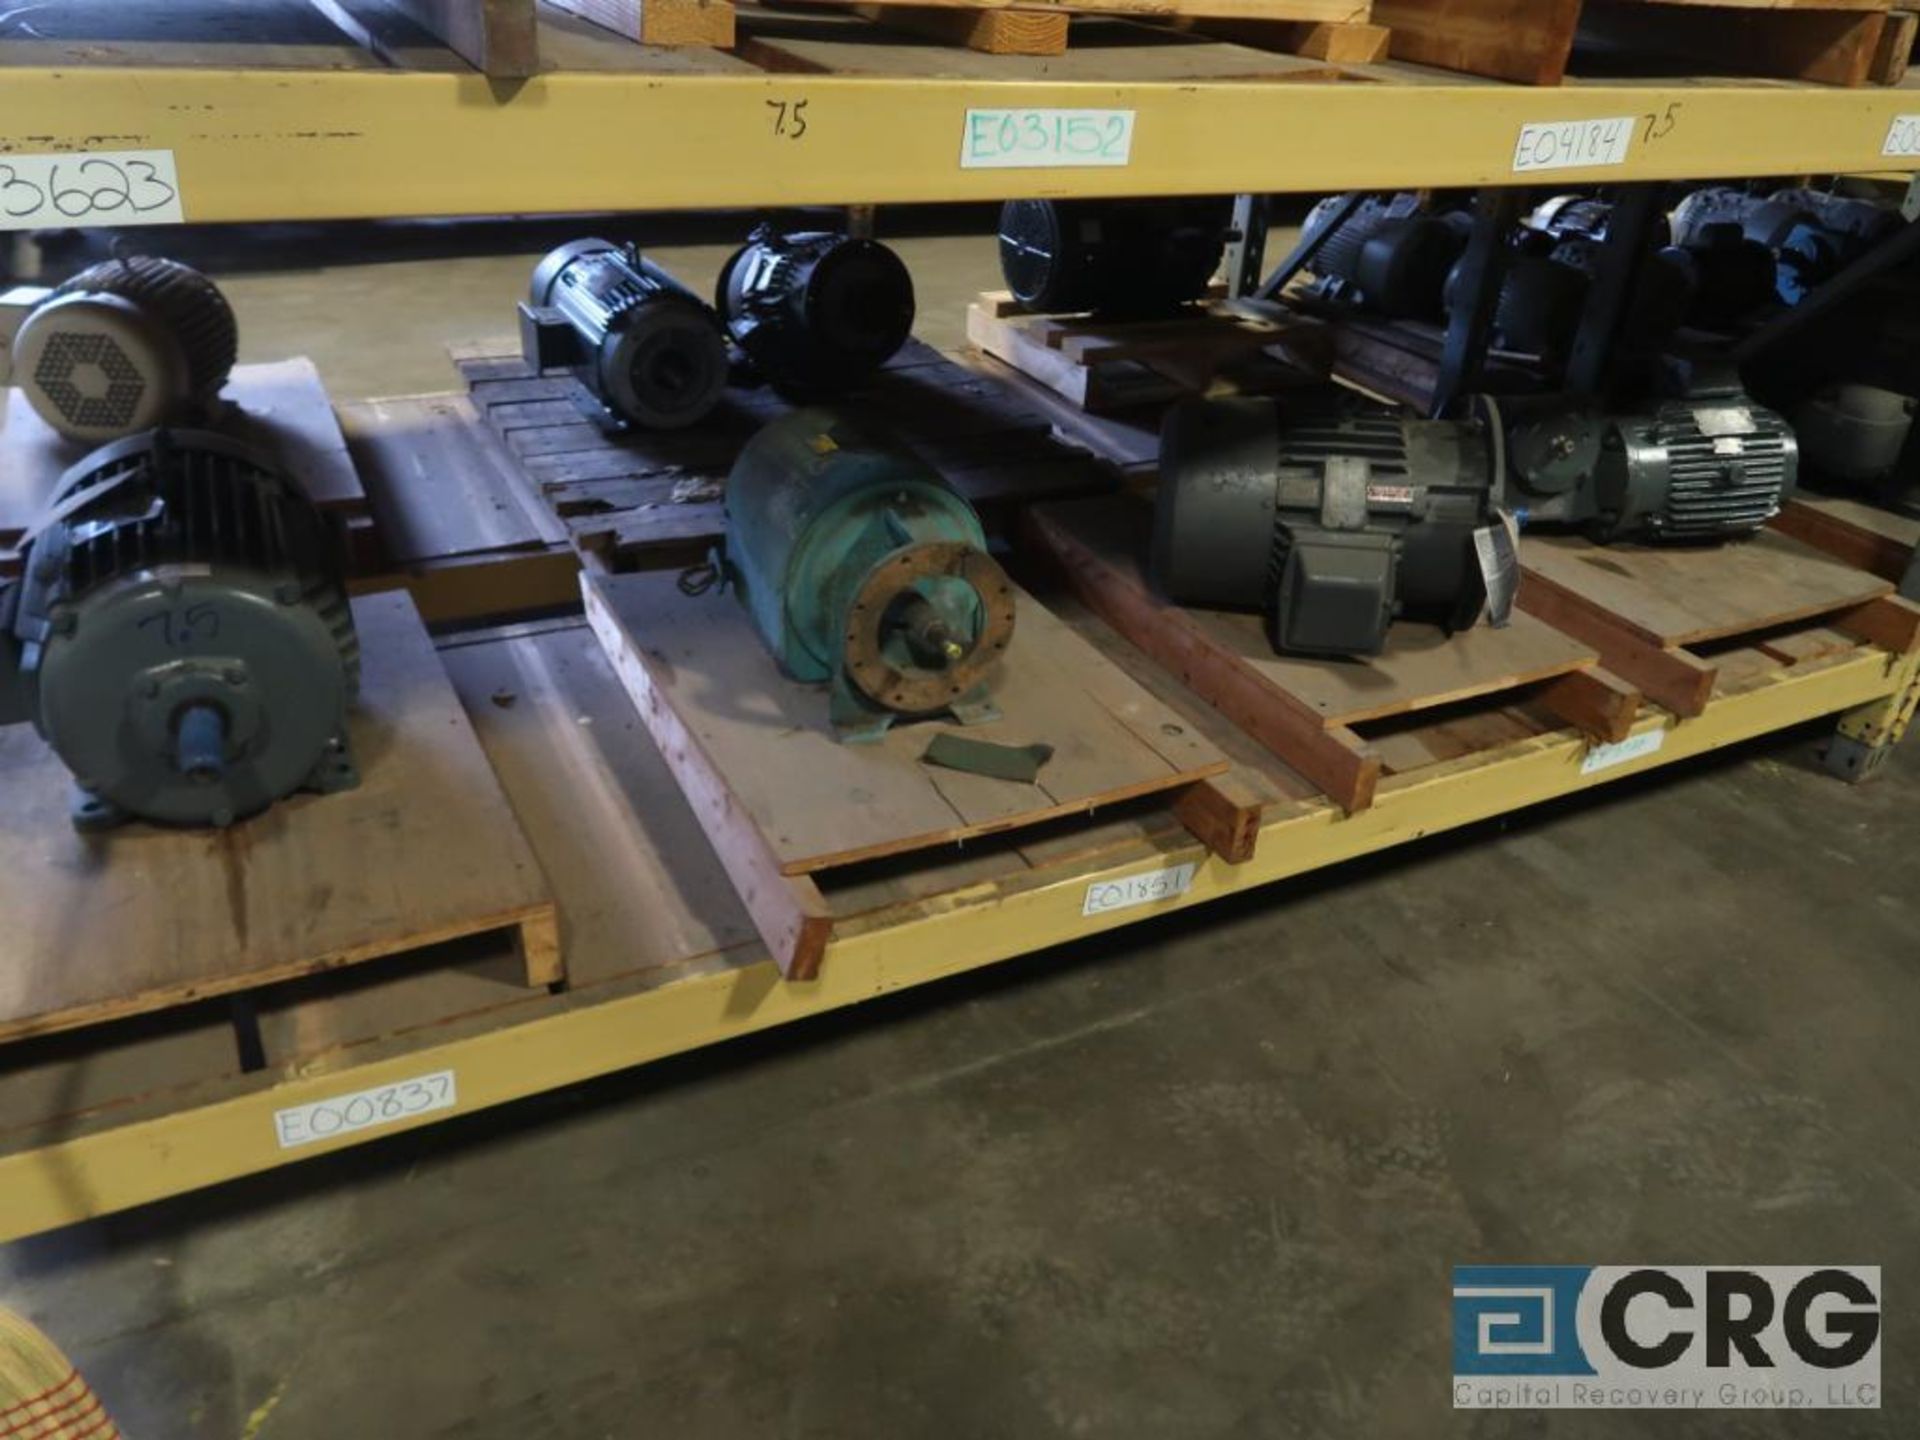 Lot of (32) assorted 15 HP, 10 HP, and 7.5 HP motors on (7) shelves, some with gear drives (Motor